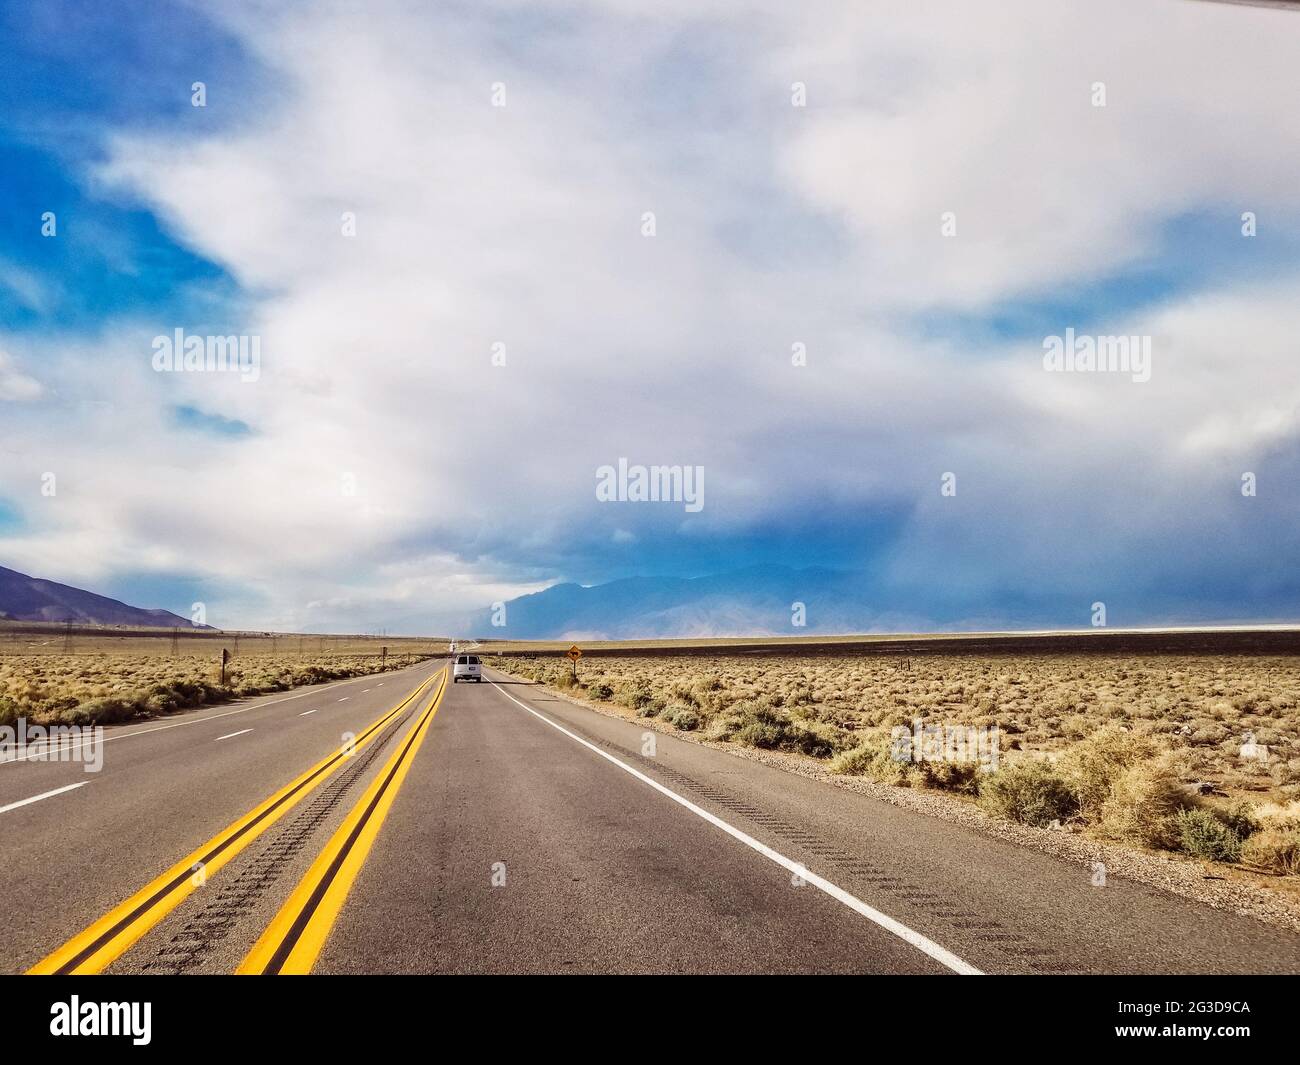 Dramatic view of road with cloudy and smokey sky from nearby fires Stock Photo